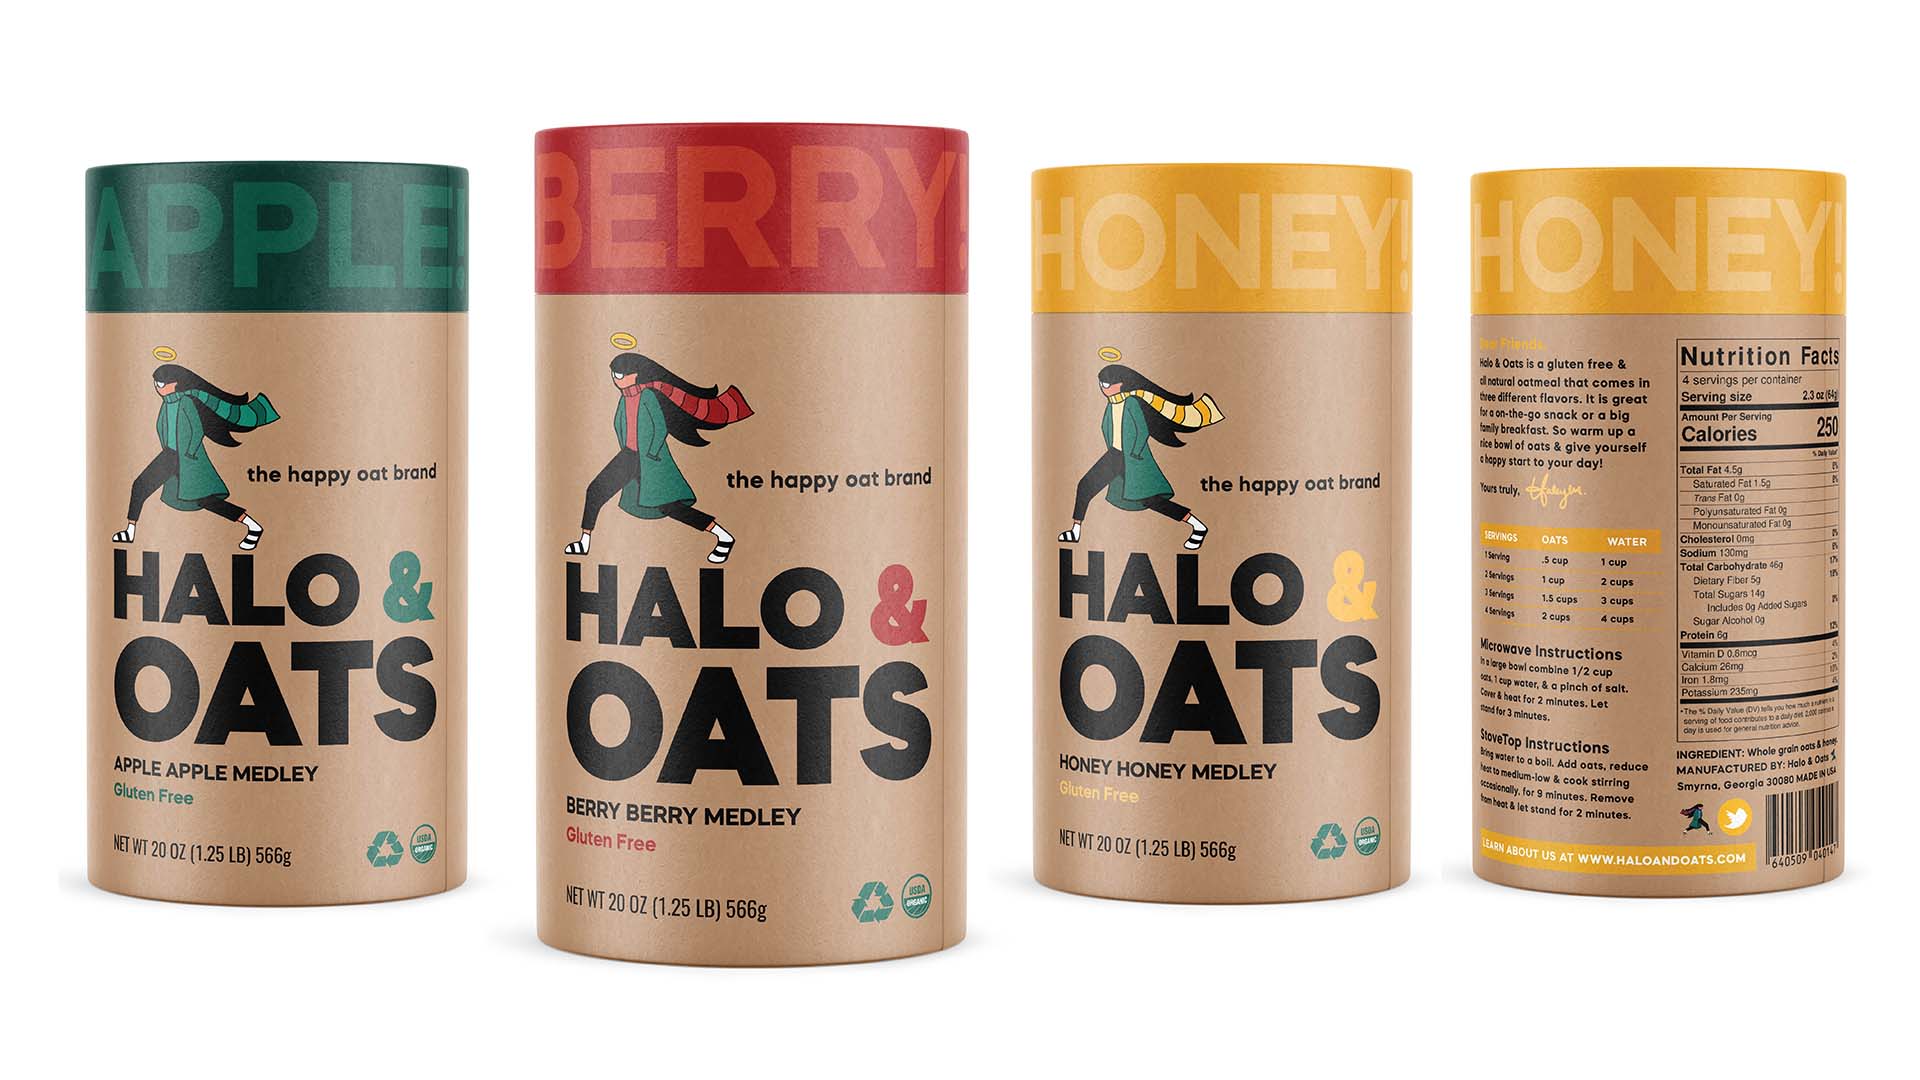  / “Halo & Oats,” Product branding and label design, 4 x 6 inches, 2021. Halo & Oats is a brand designed for a tasty & all-natural oatmeal.  